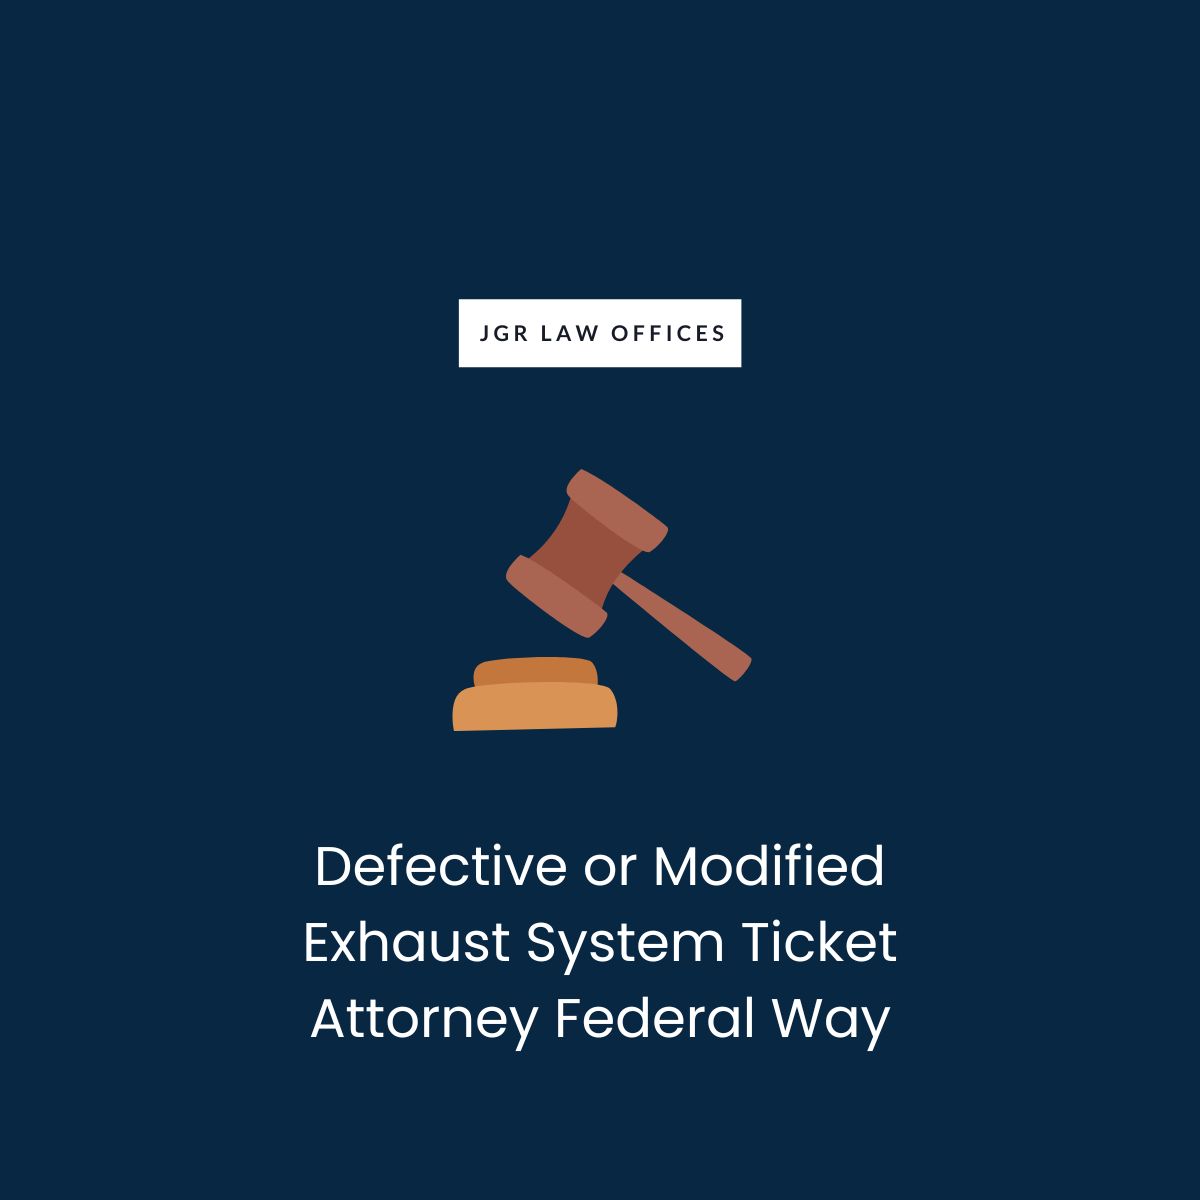 Defective or Modified Exhaust System Ticket Attorney Federal Way